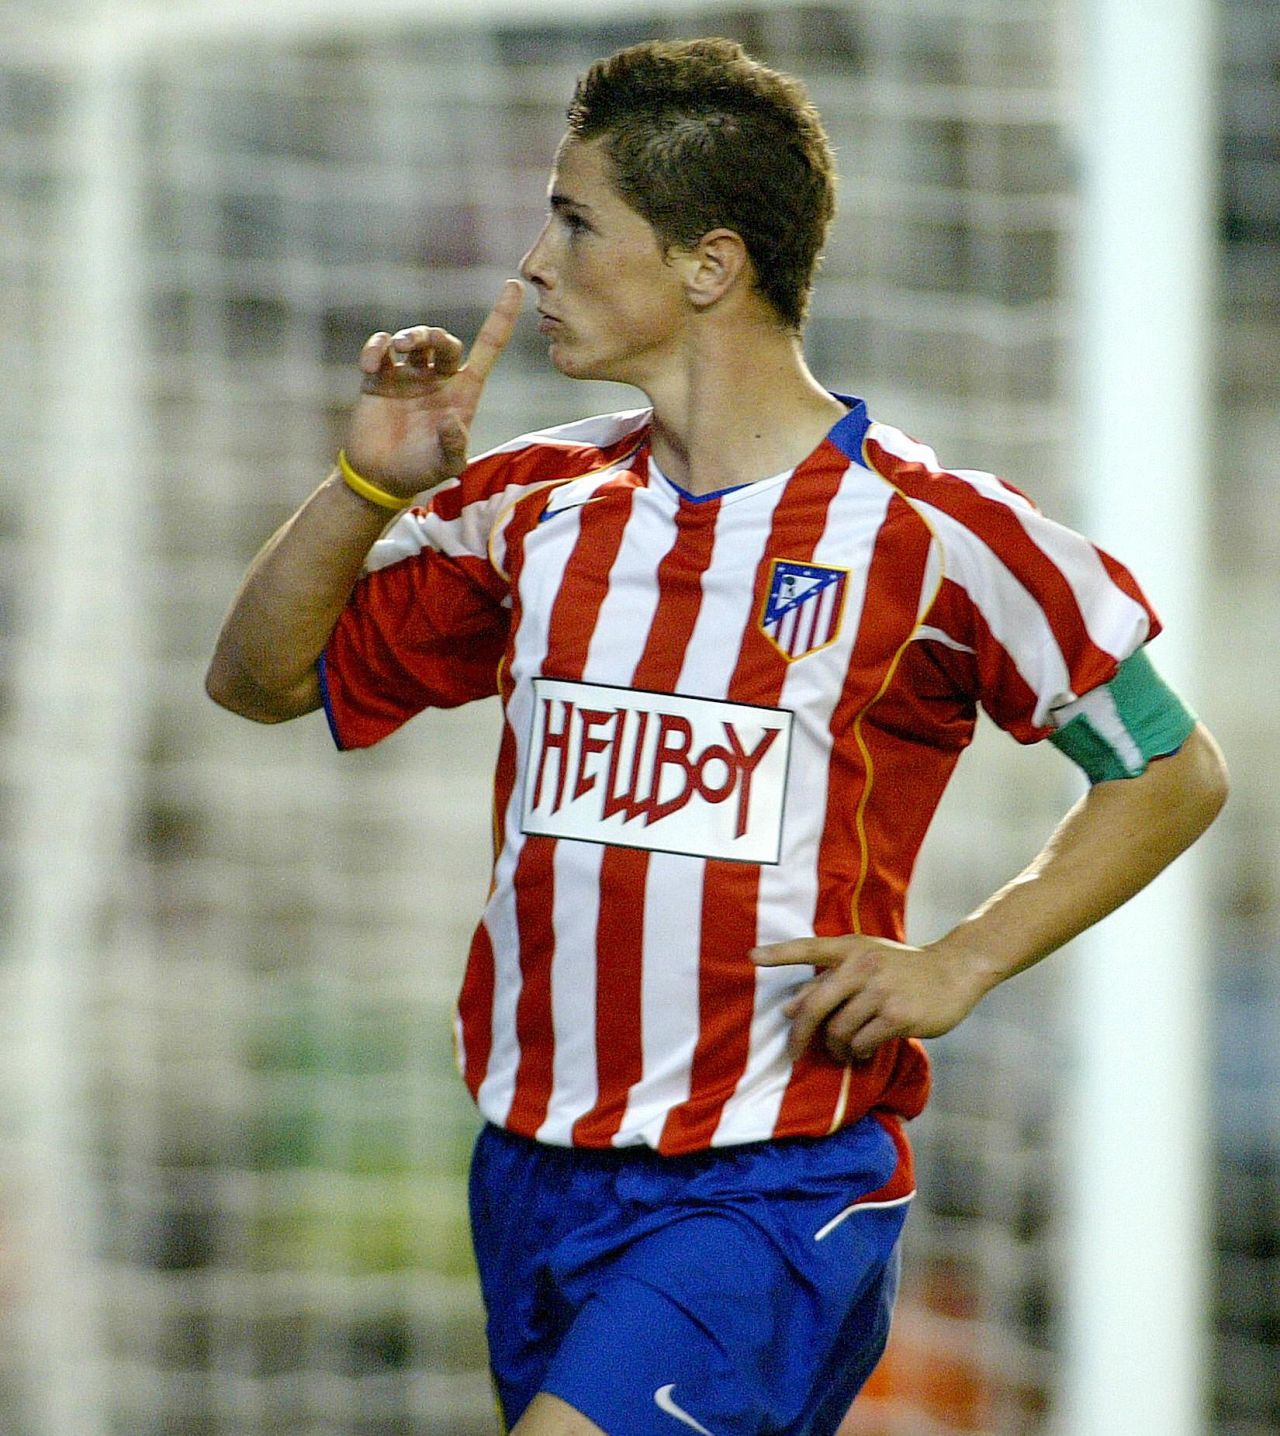 Atletico brought prodigal son Fernando Torres back to Madrid on loan in January 2015, and the former Liverpool and AC Milan striker signed a permanent deal in August.